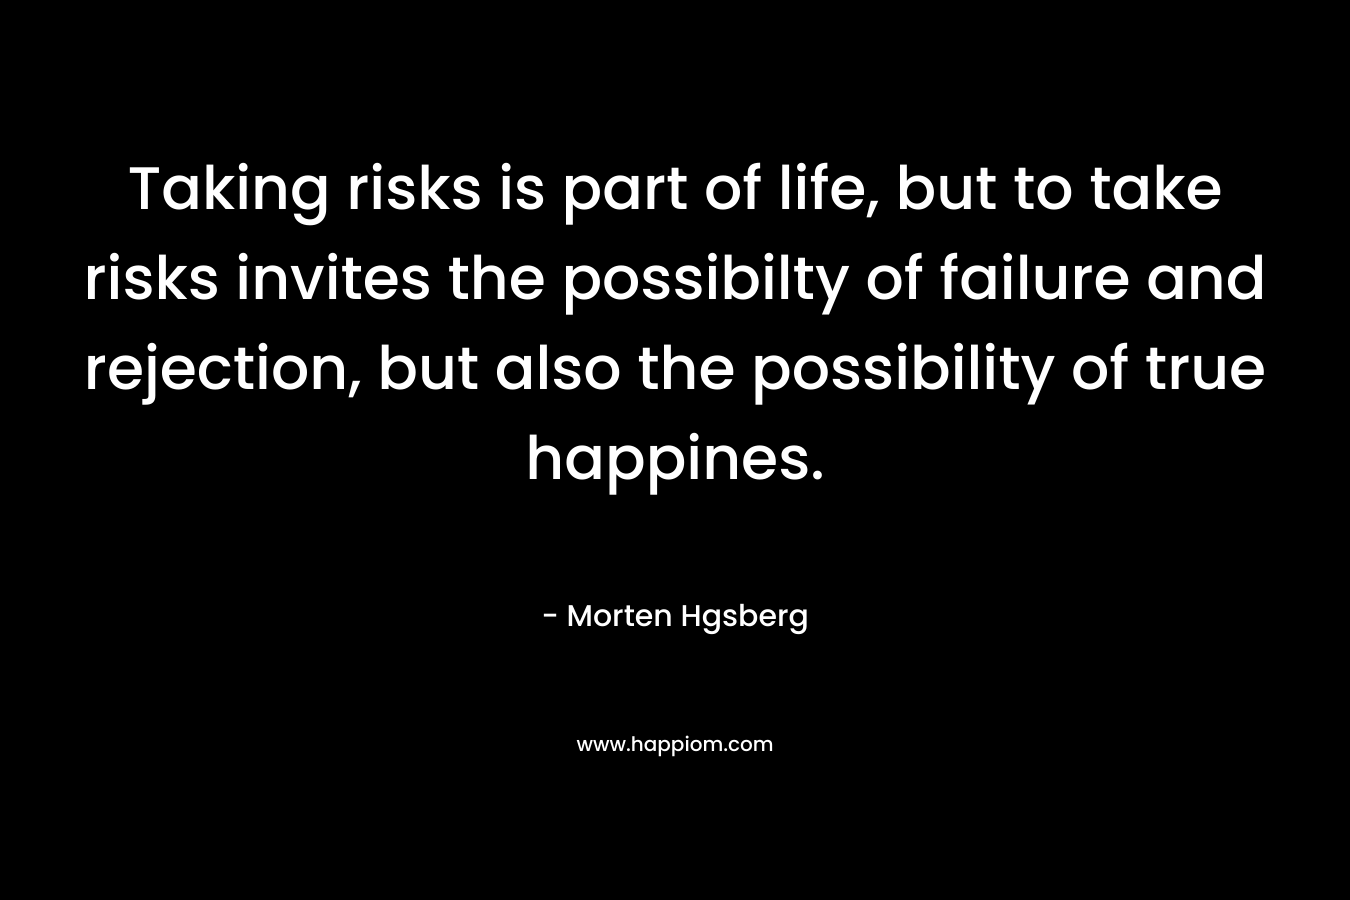 Taking risks is part of life, but to take risks invites the possibilty of failure and rejection, but also the possibility of true happines. – Morten Hgsberg